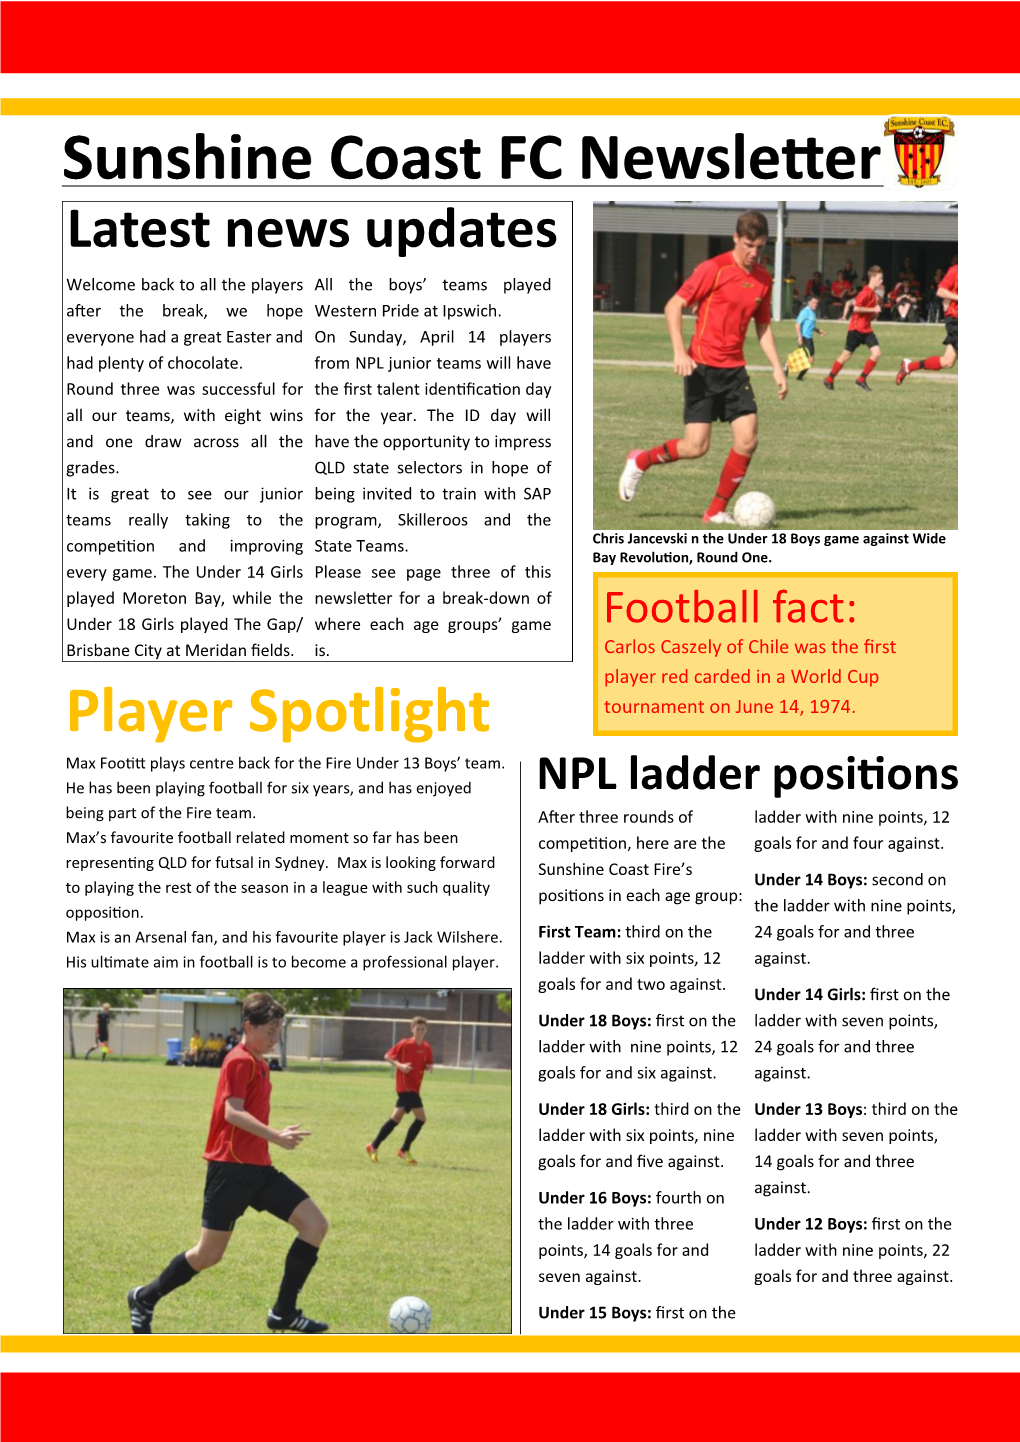 Sunshine Coast FC Newsletter Latest News Updates Welcome Back to All the Players All the Boys’ Teams Played After the Break, We Hope Western Pride at Ipswich